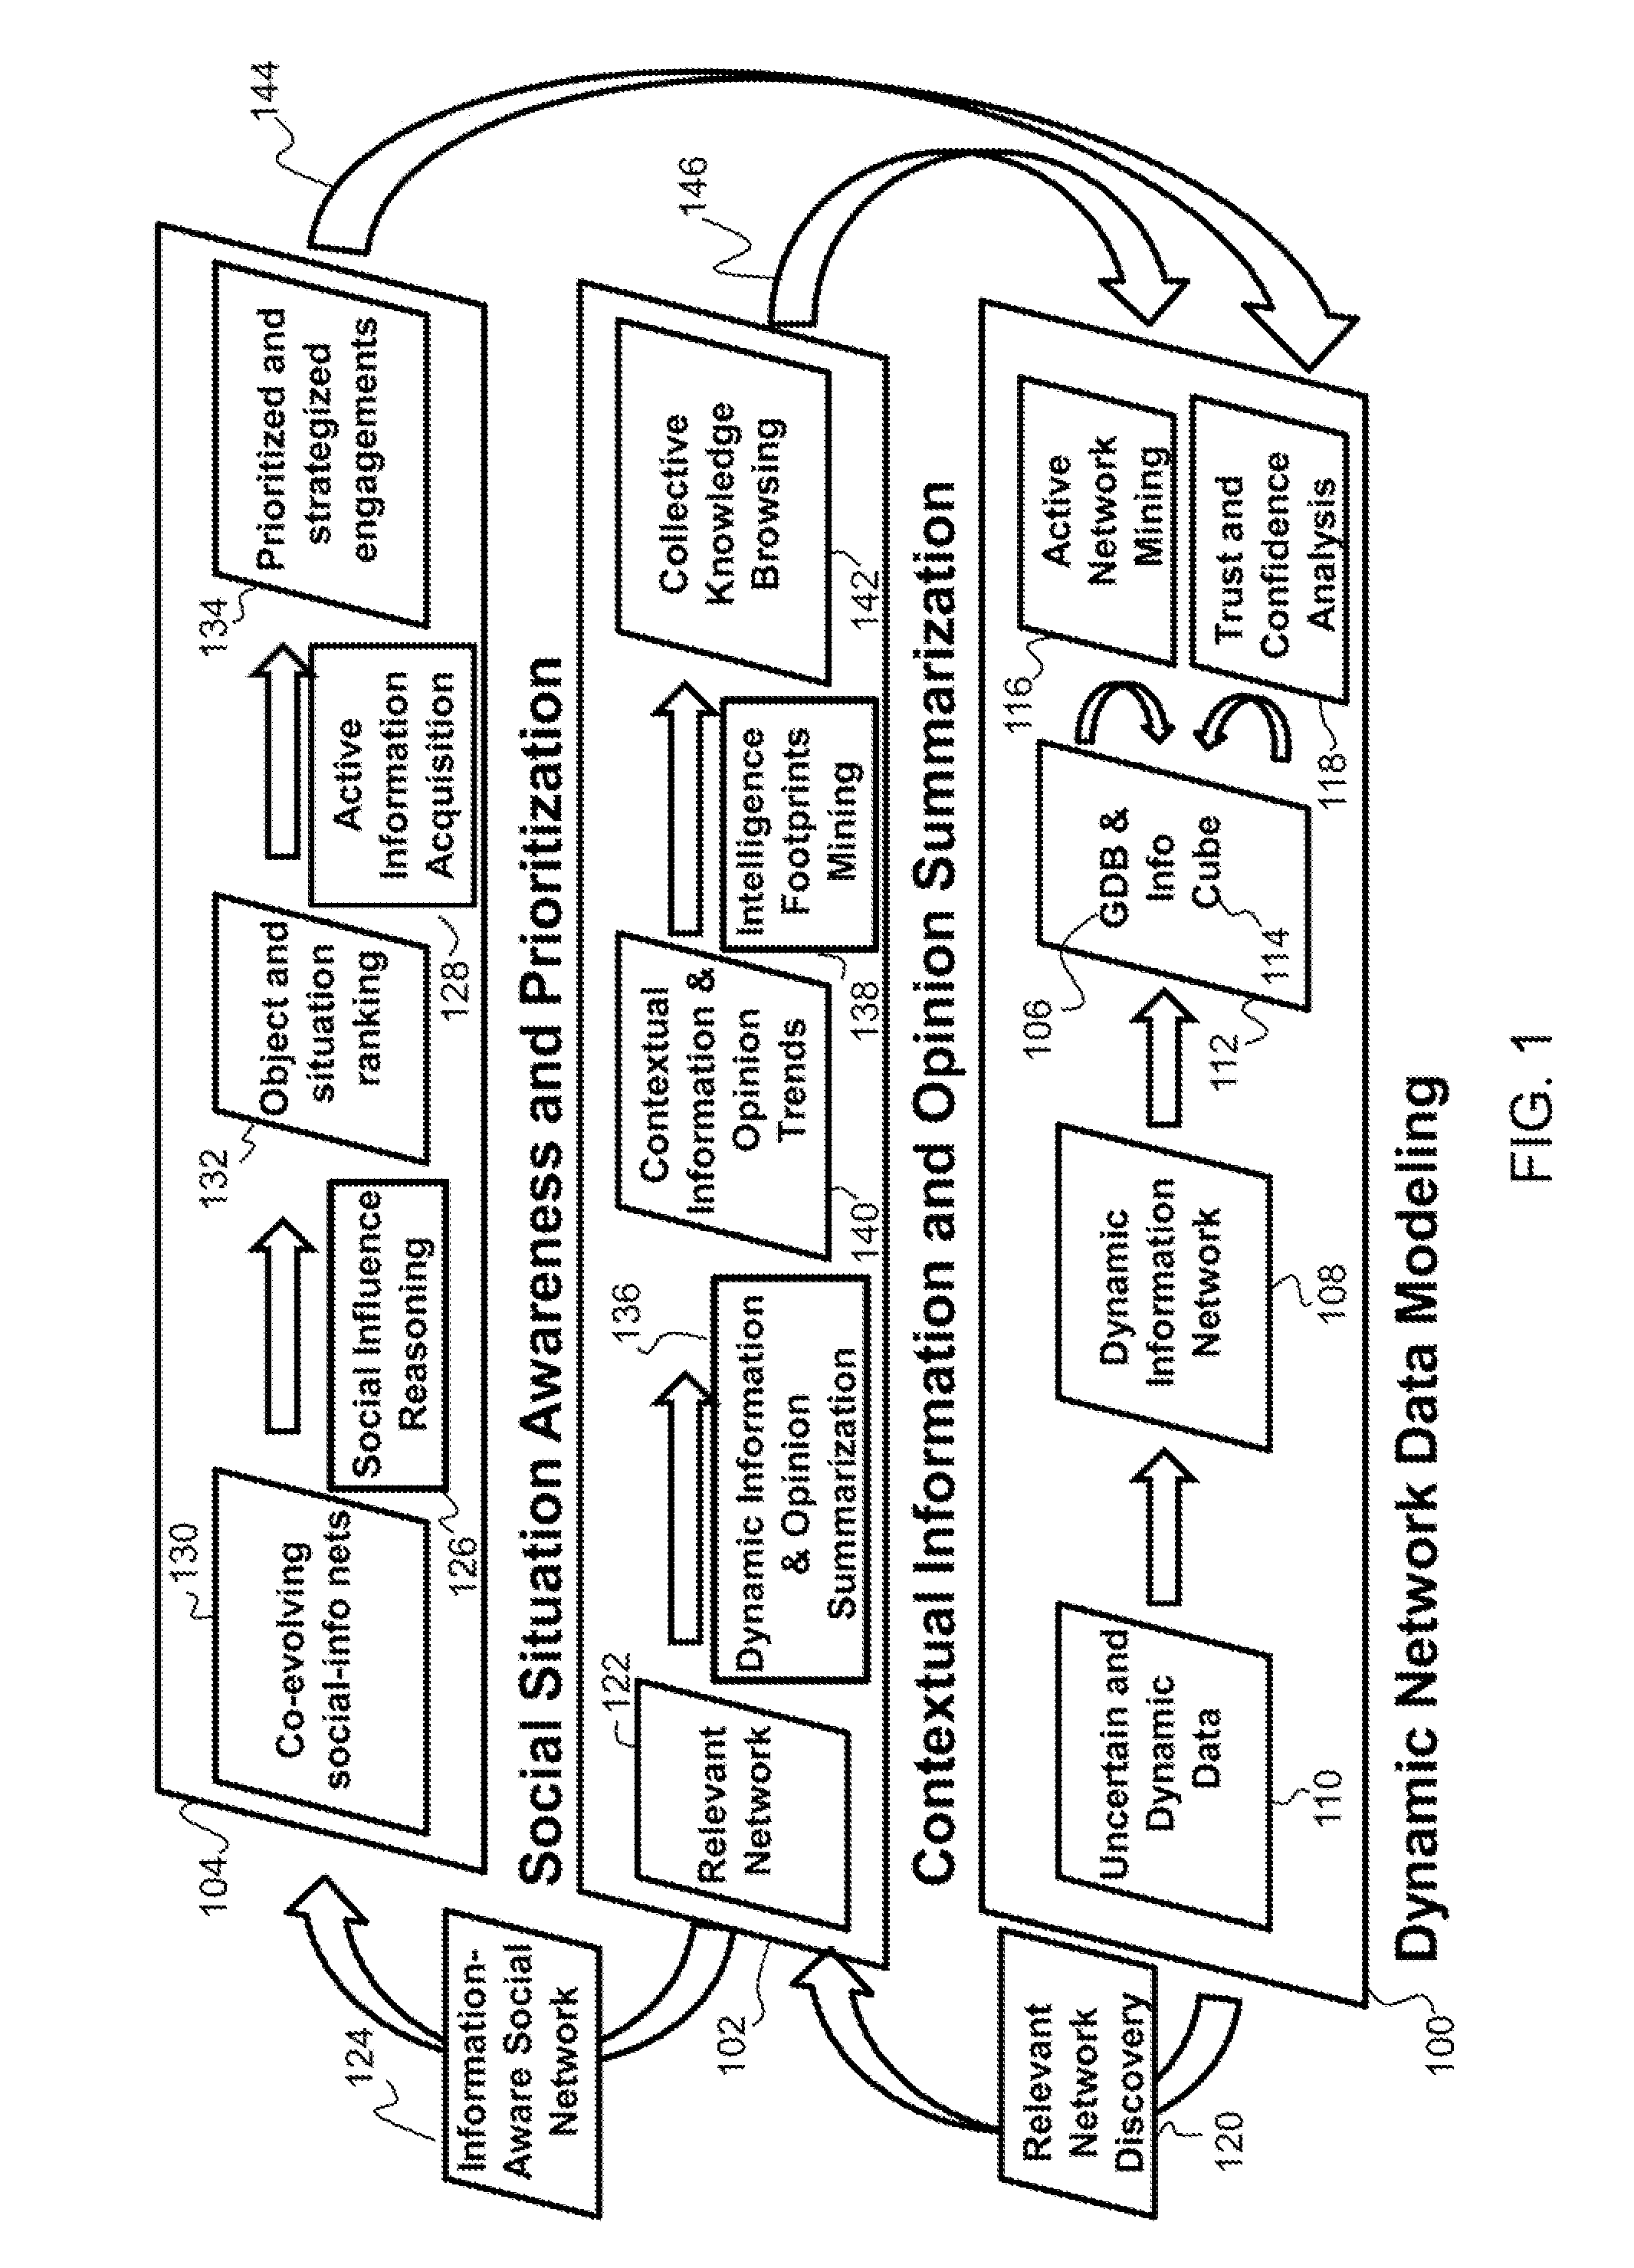 System and method of computational social network development environment for human intelligence